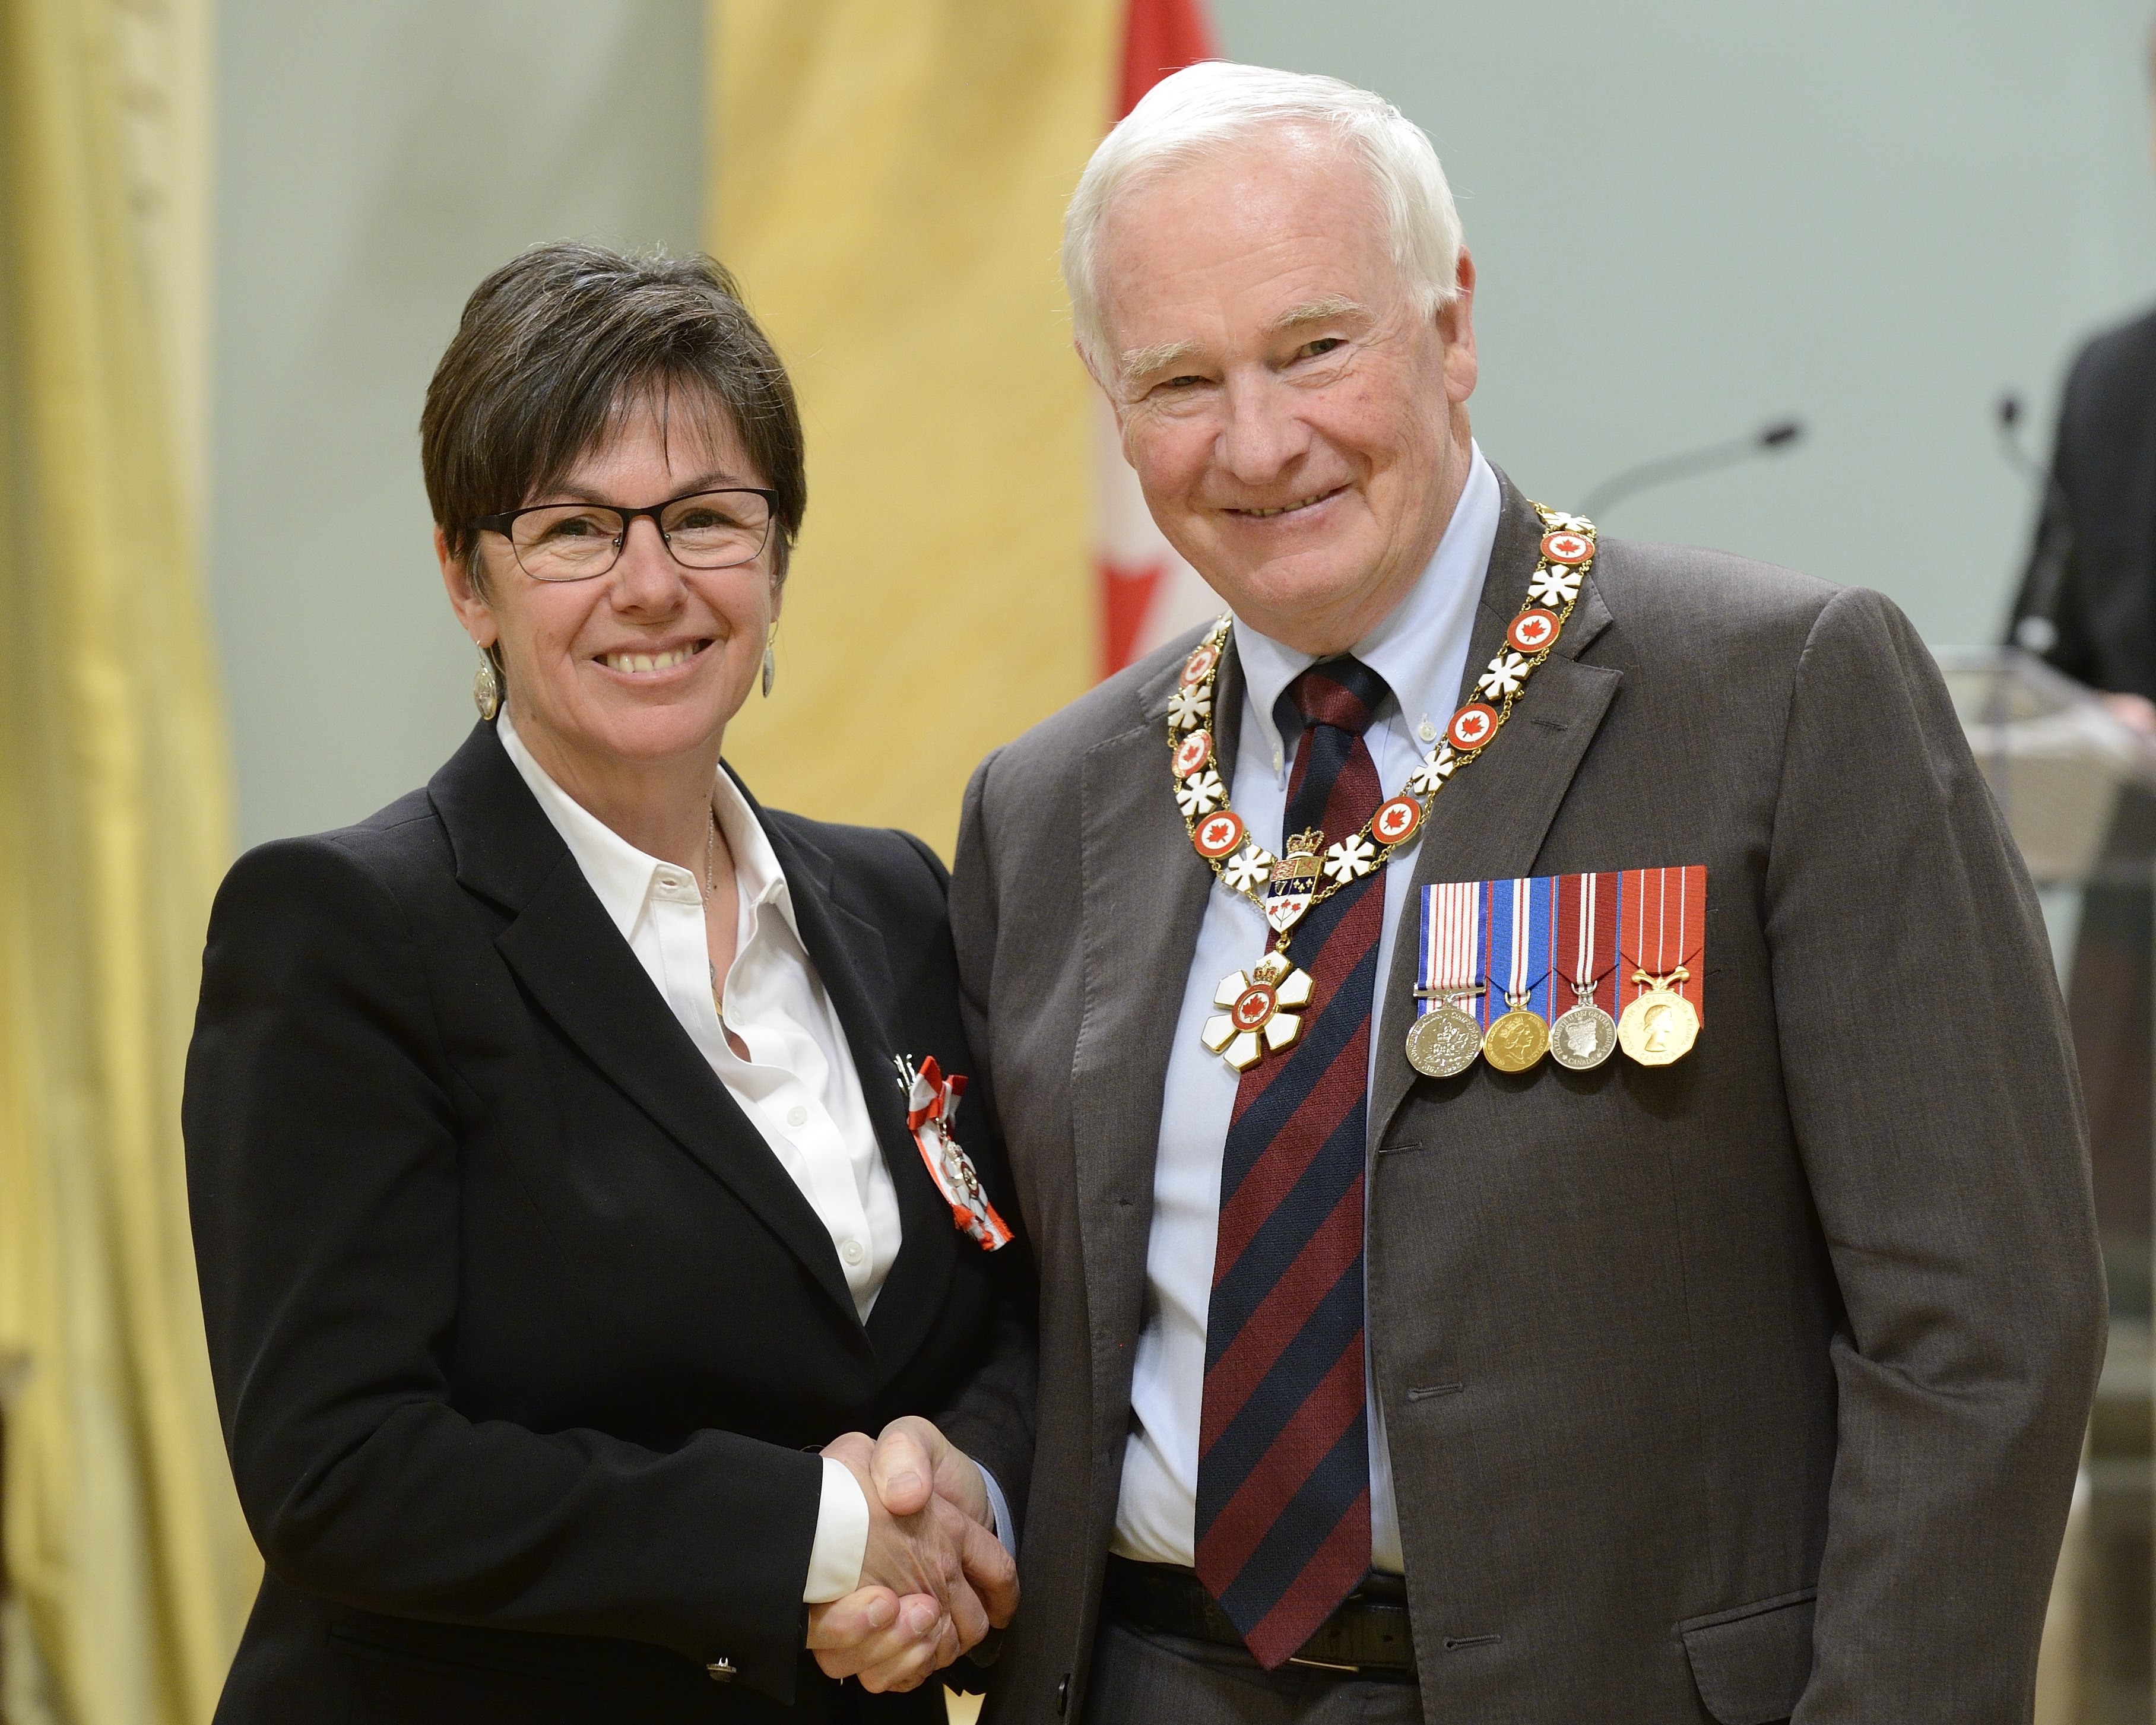 Photo: Kim Pate, CM, (left) receives the Order of Canada from His Excellency the Right Honourable David Johnston Governor General of Canada. Photo credit: MCpl Vincent Carbonneau, Rideau Hall ©Her Majesty The Queen in Right of Canada represented by the Office of the Secretary to the Governor General (OSGG), 2015. Reproduced with permission of the OSGG, 2015. 